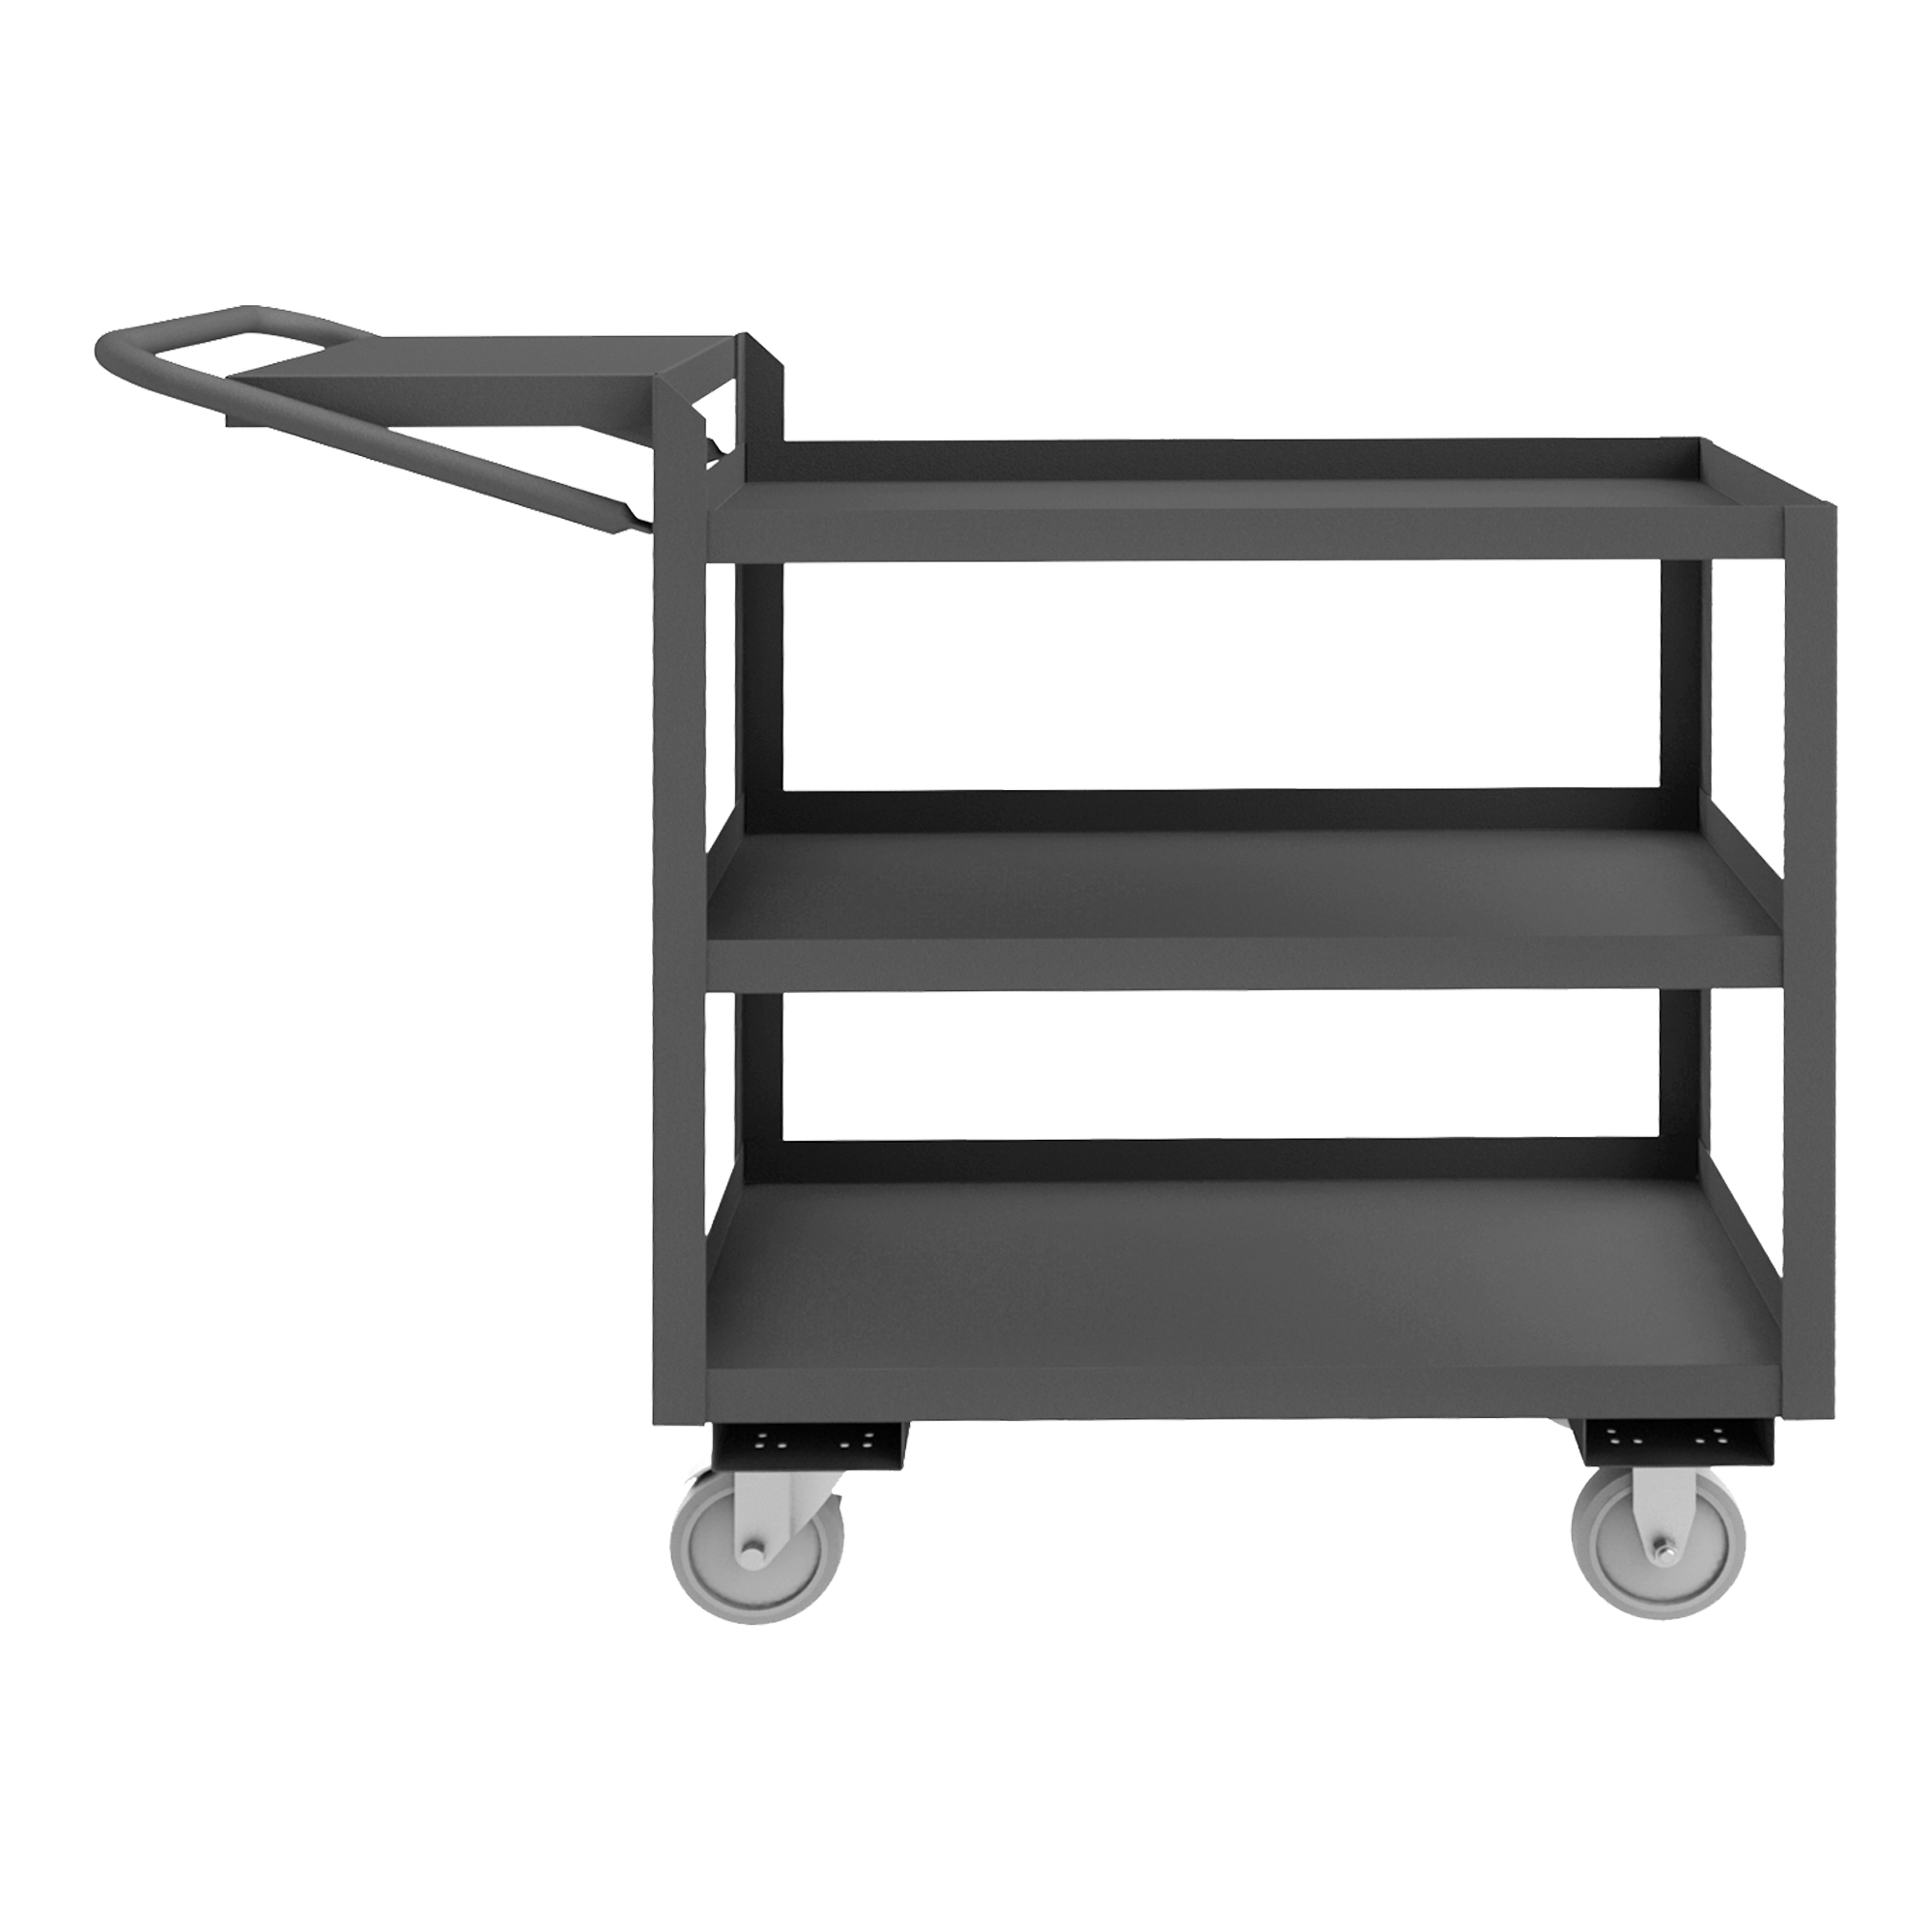 Order Picking Cart, 3 Shelf With Lip, Size 18 x 32 Inch